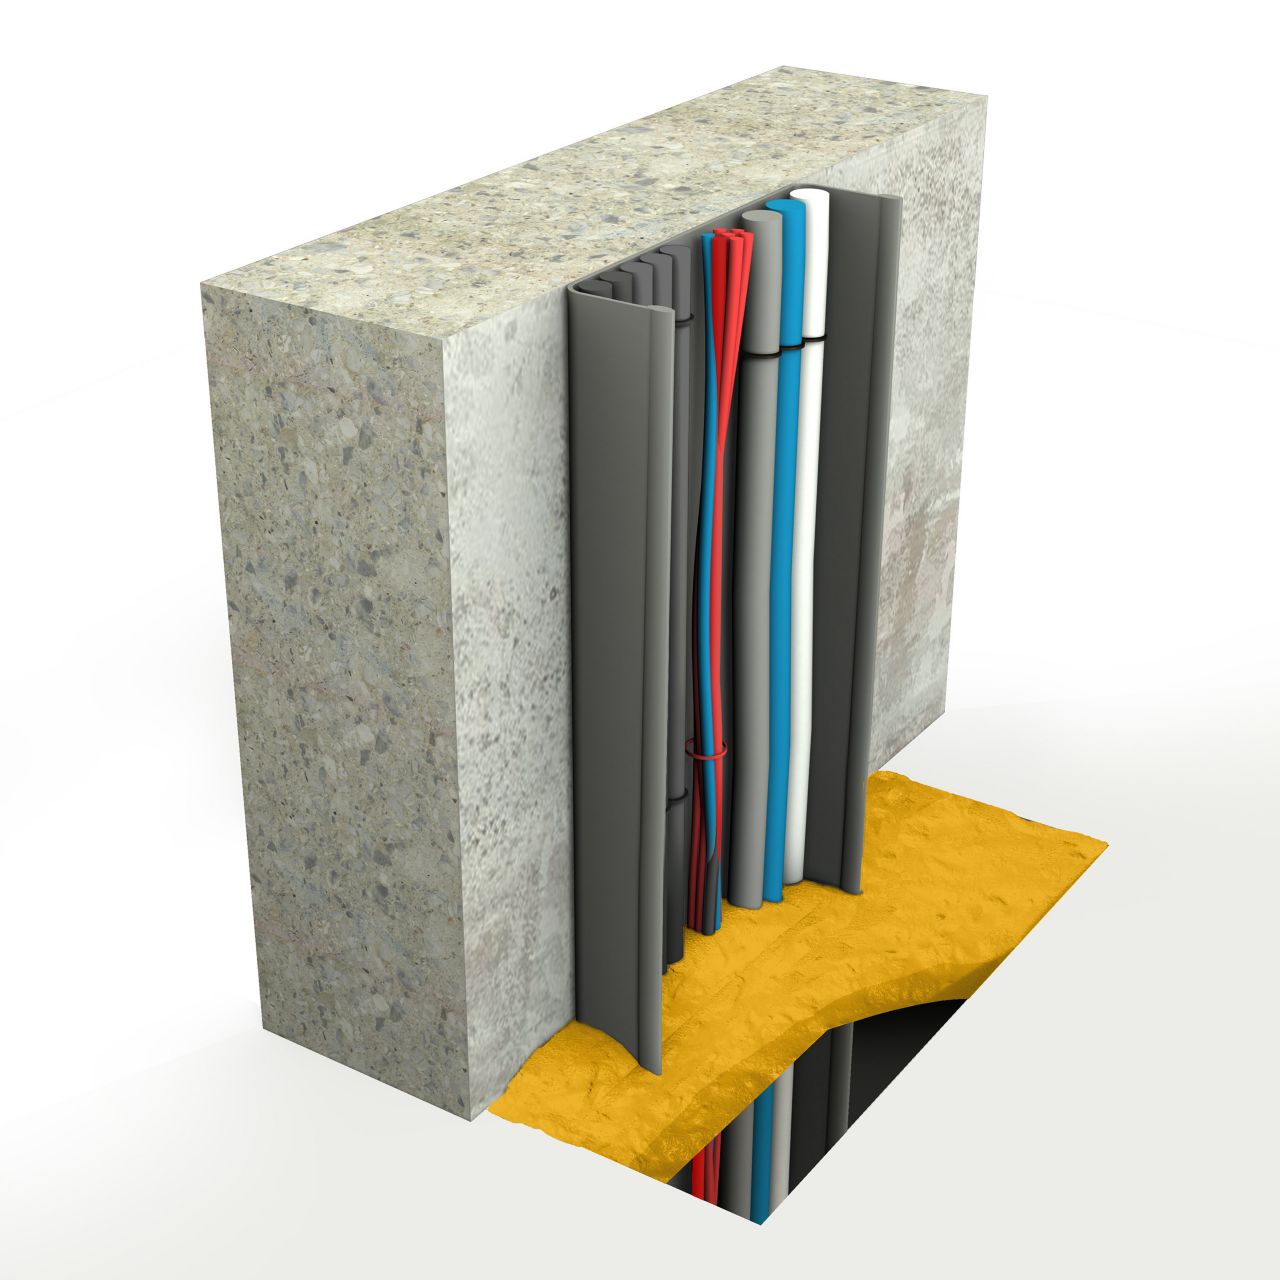 Passive fire protection in the floor with Sikacrete - Expanding Intumescent Material Illustration